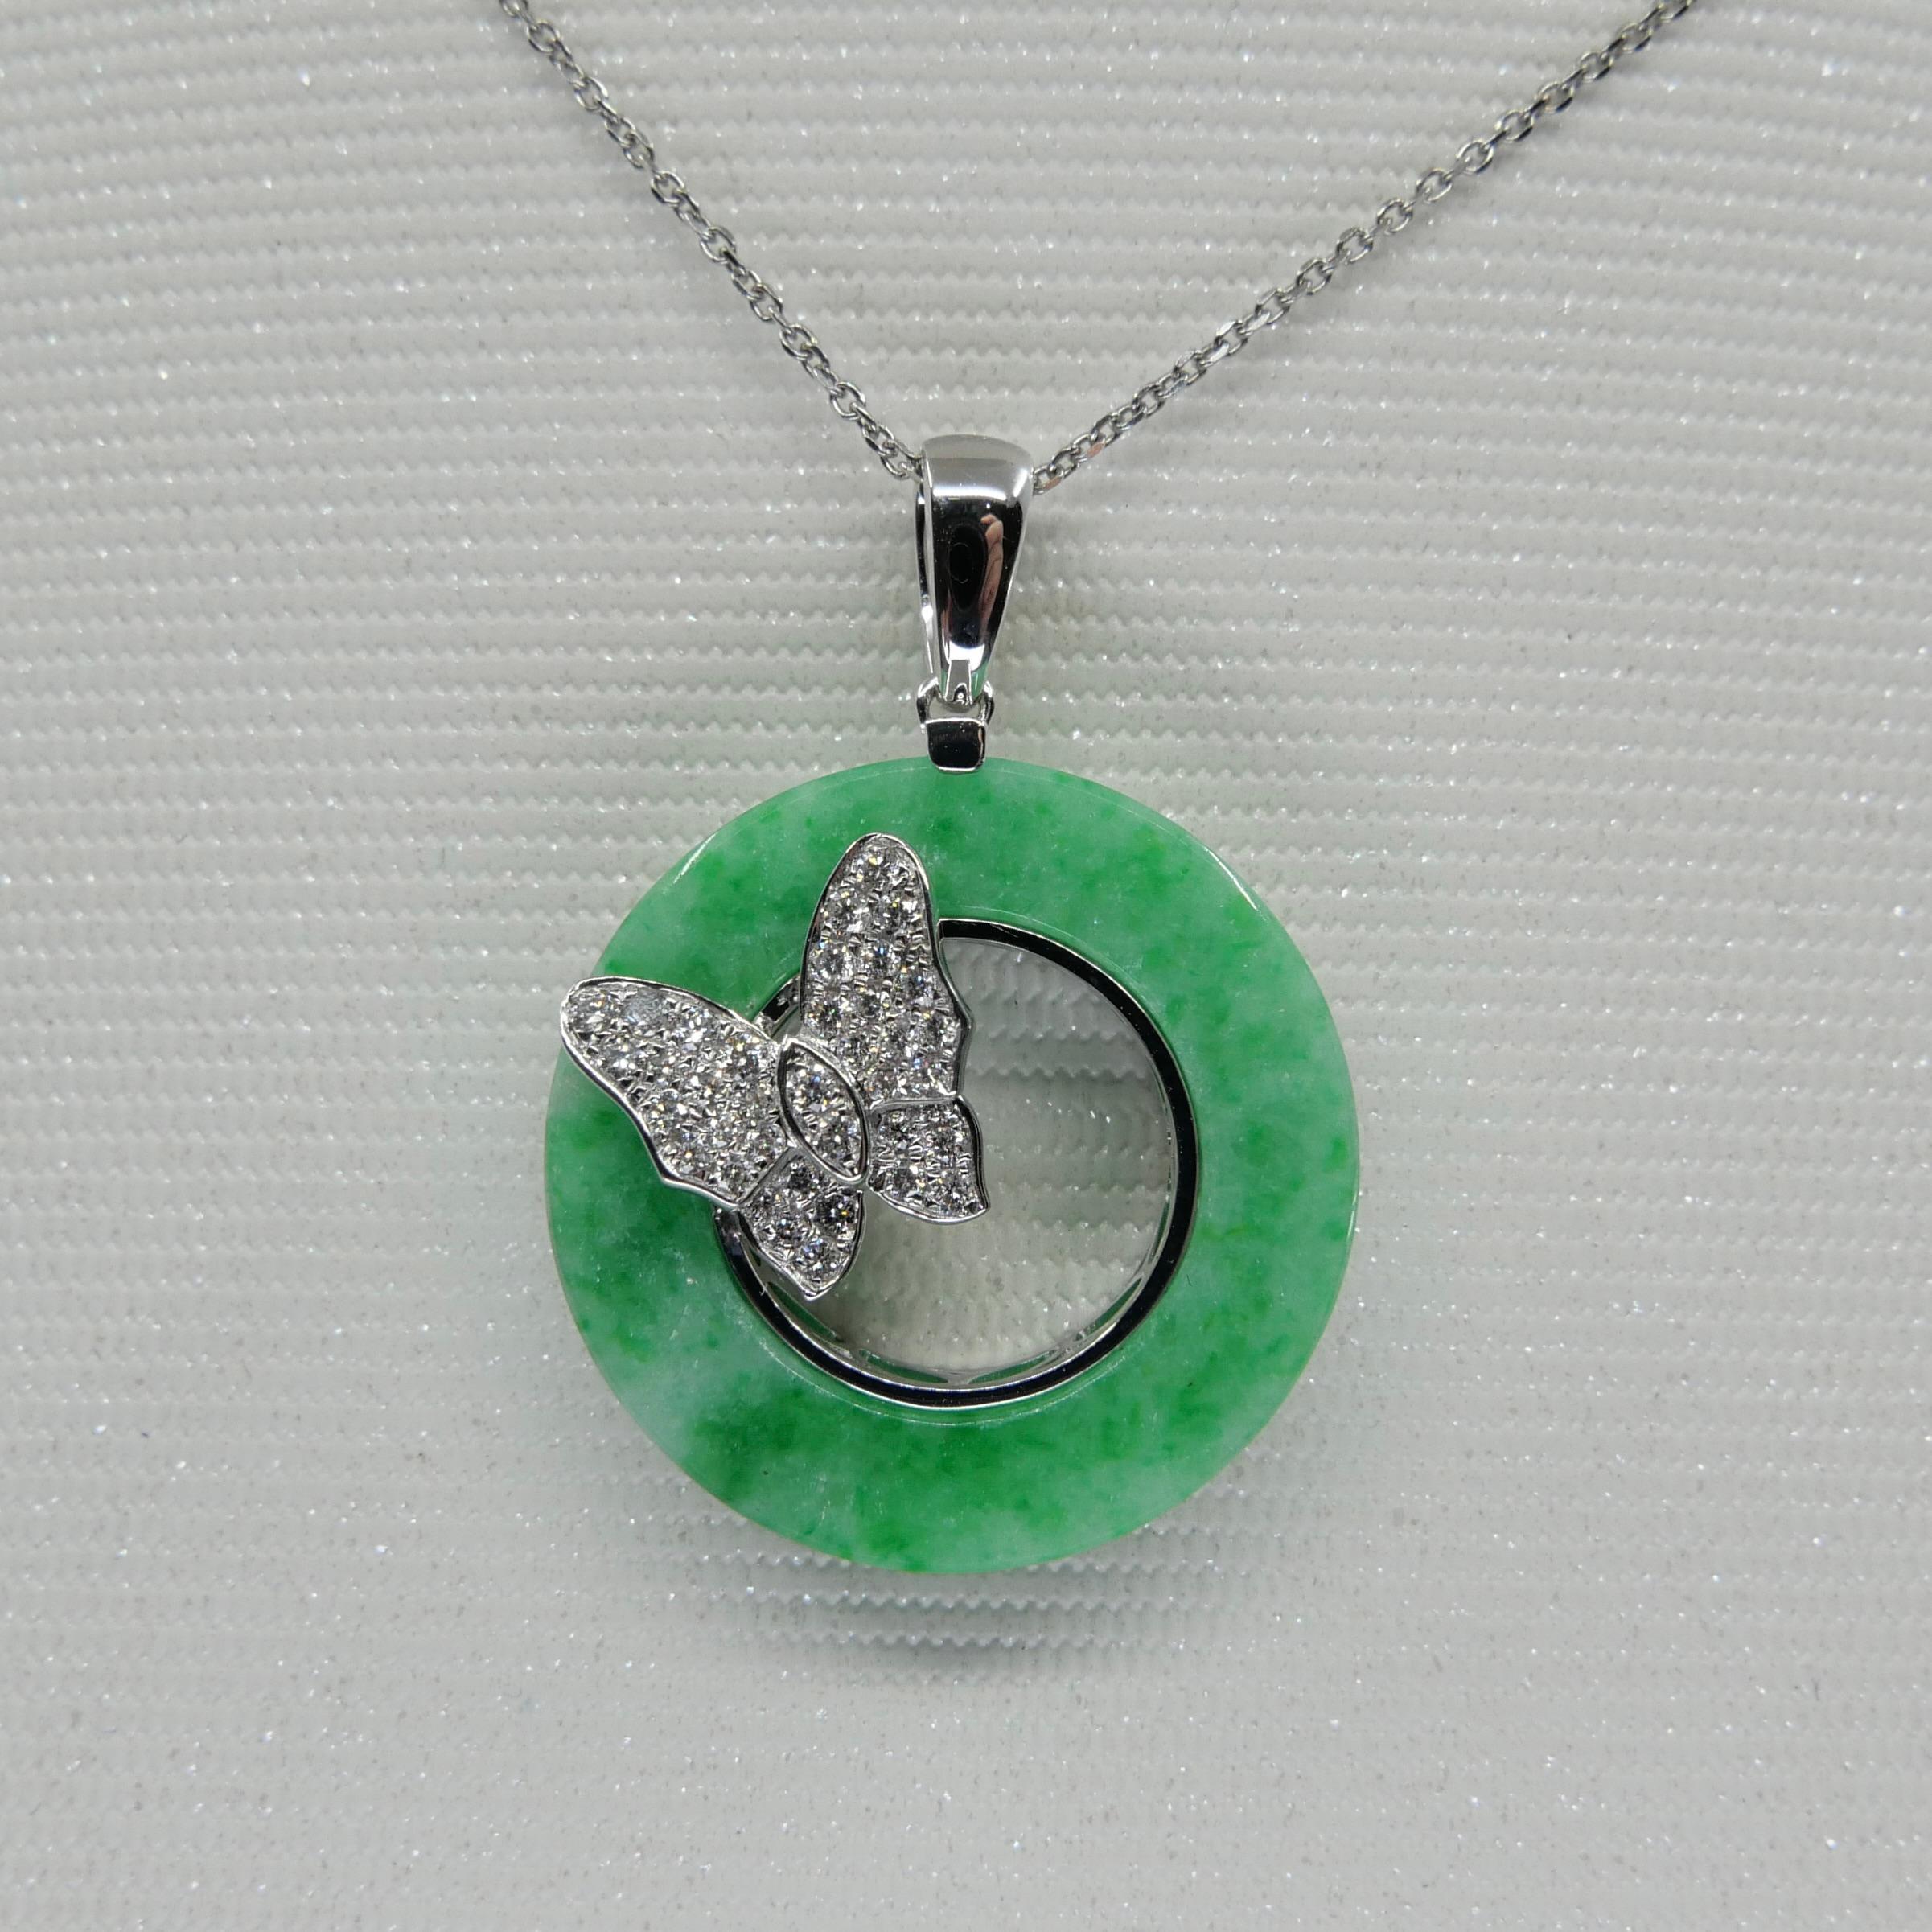 Rough Cut Certified Apple Green Jade 13.72 Cts And Diamond Butterfly Pendant Necklace.  For Sale